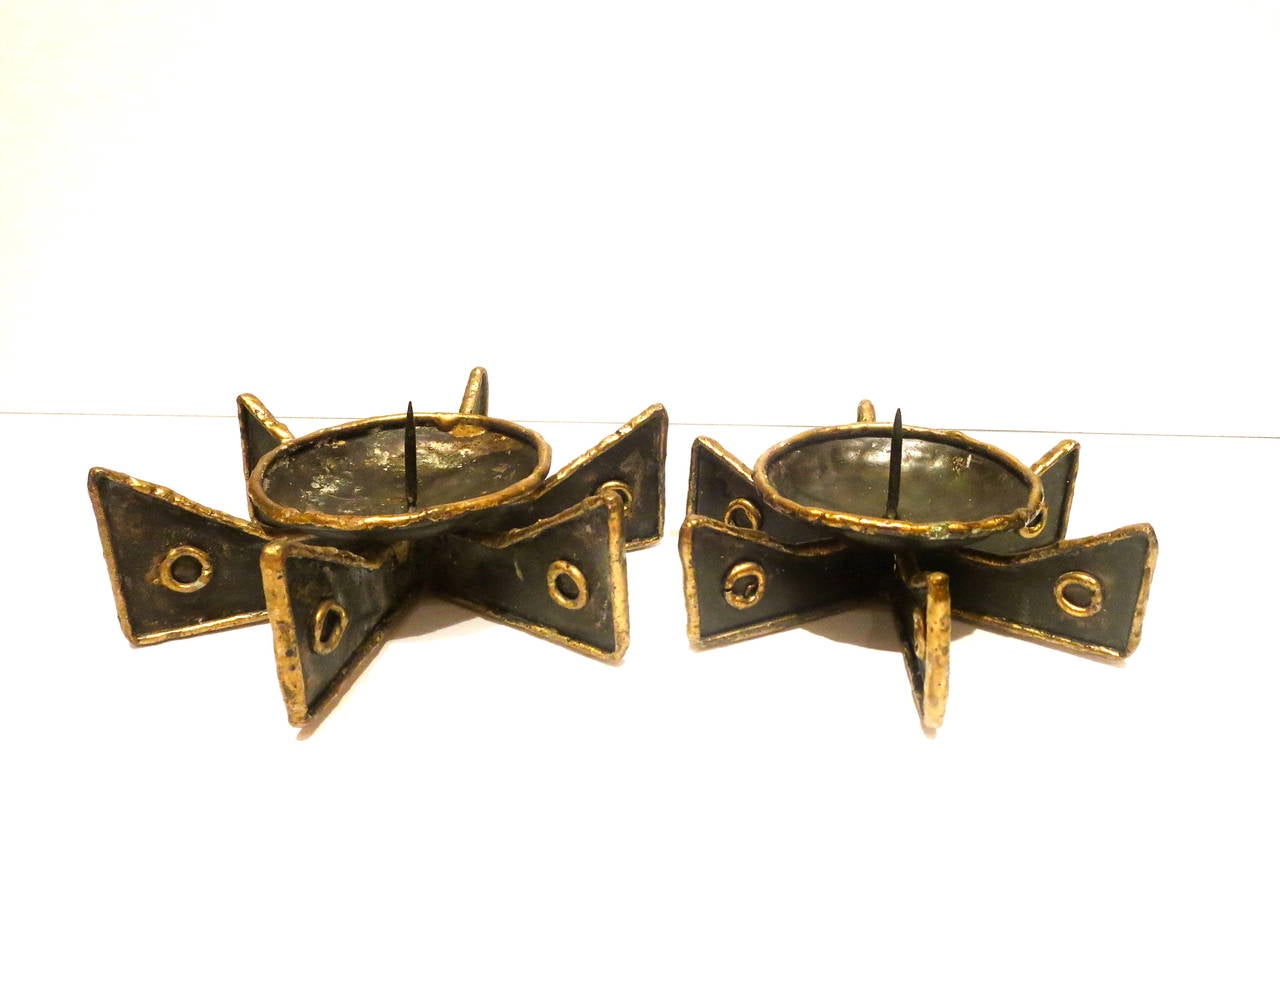 Brutalist Brutal Style Mid-Century Iron and Brass Pair of Candle Holders